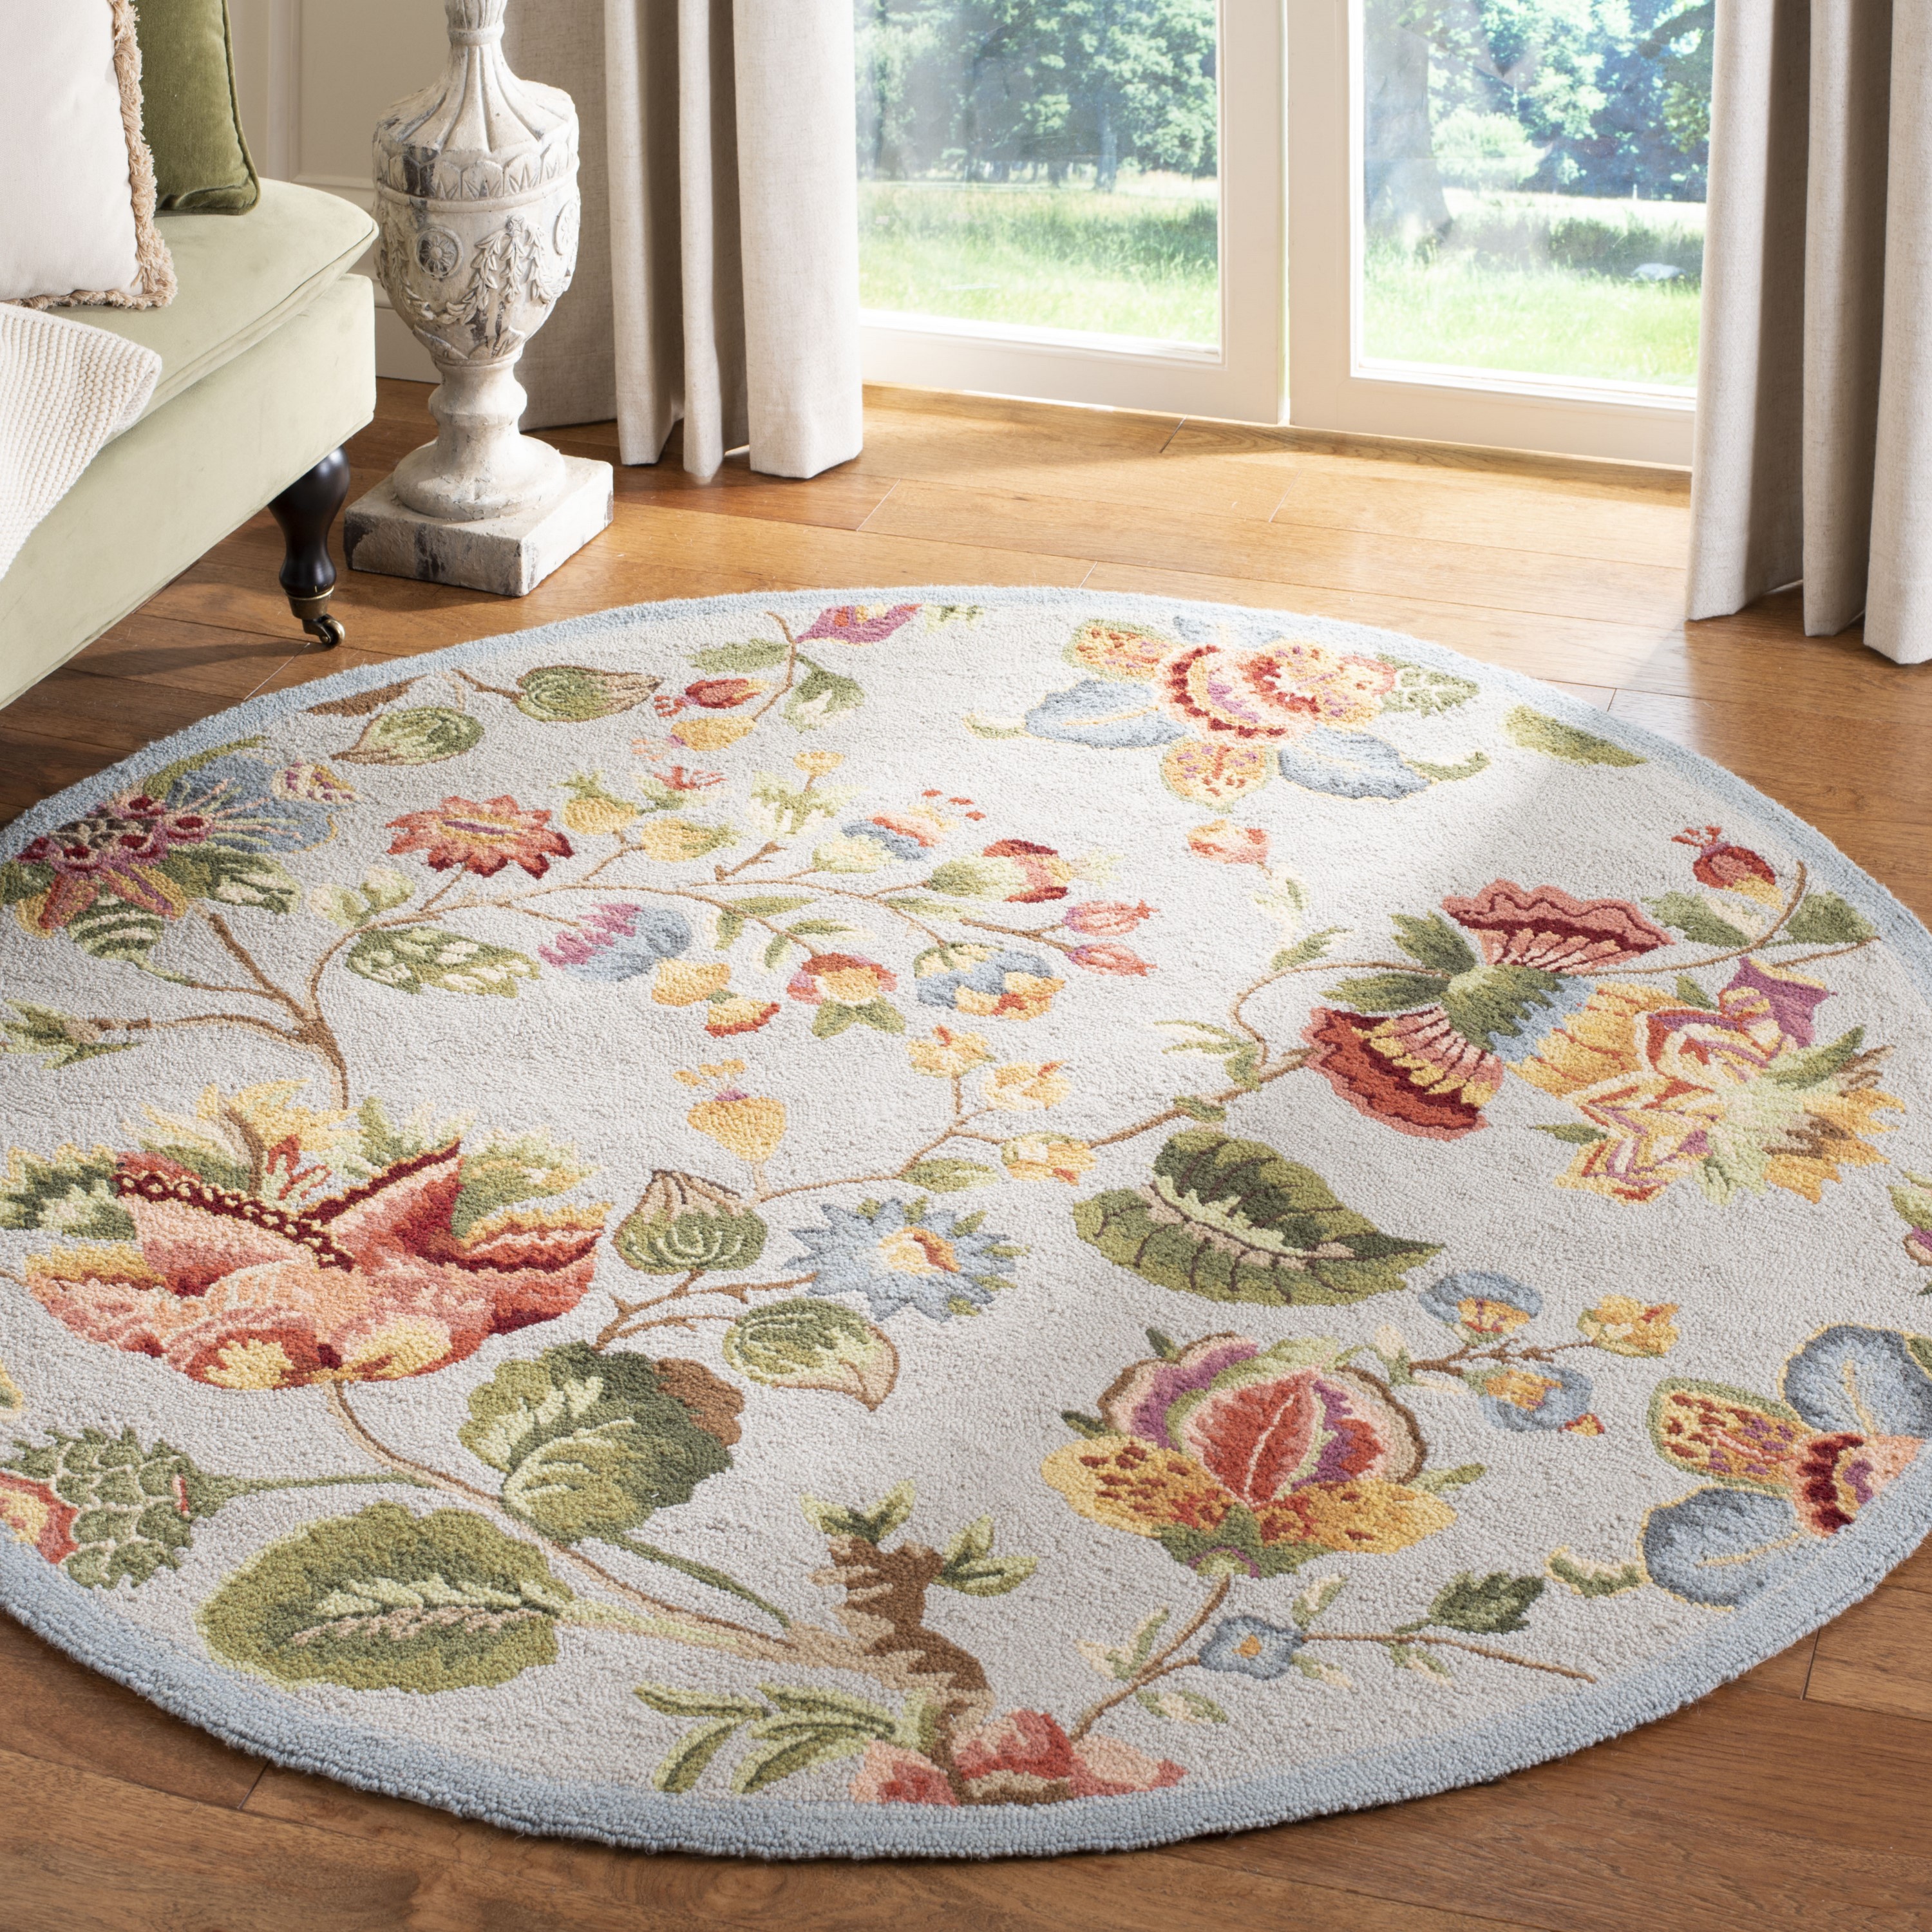 Safavieh Chelsea Lore 4 X 4 (ft) Wool Multi/Light Blue Round Indoor  Floral/Botanical Area Rug in the Rugs department at